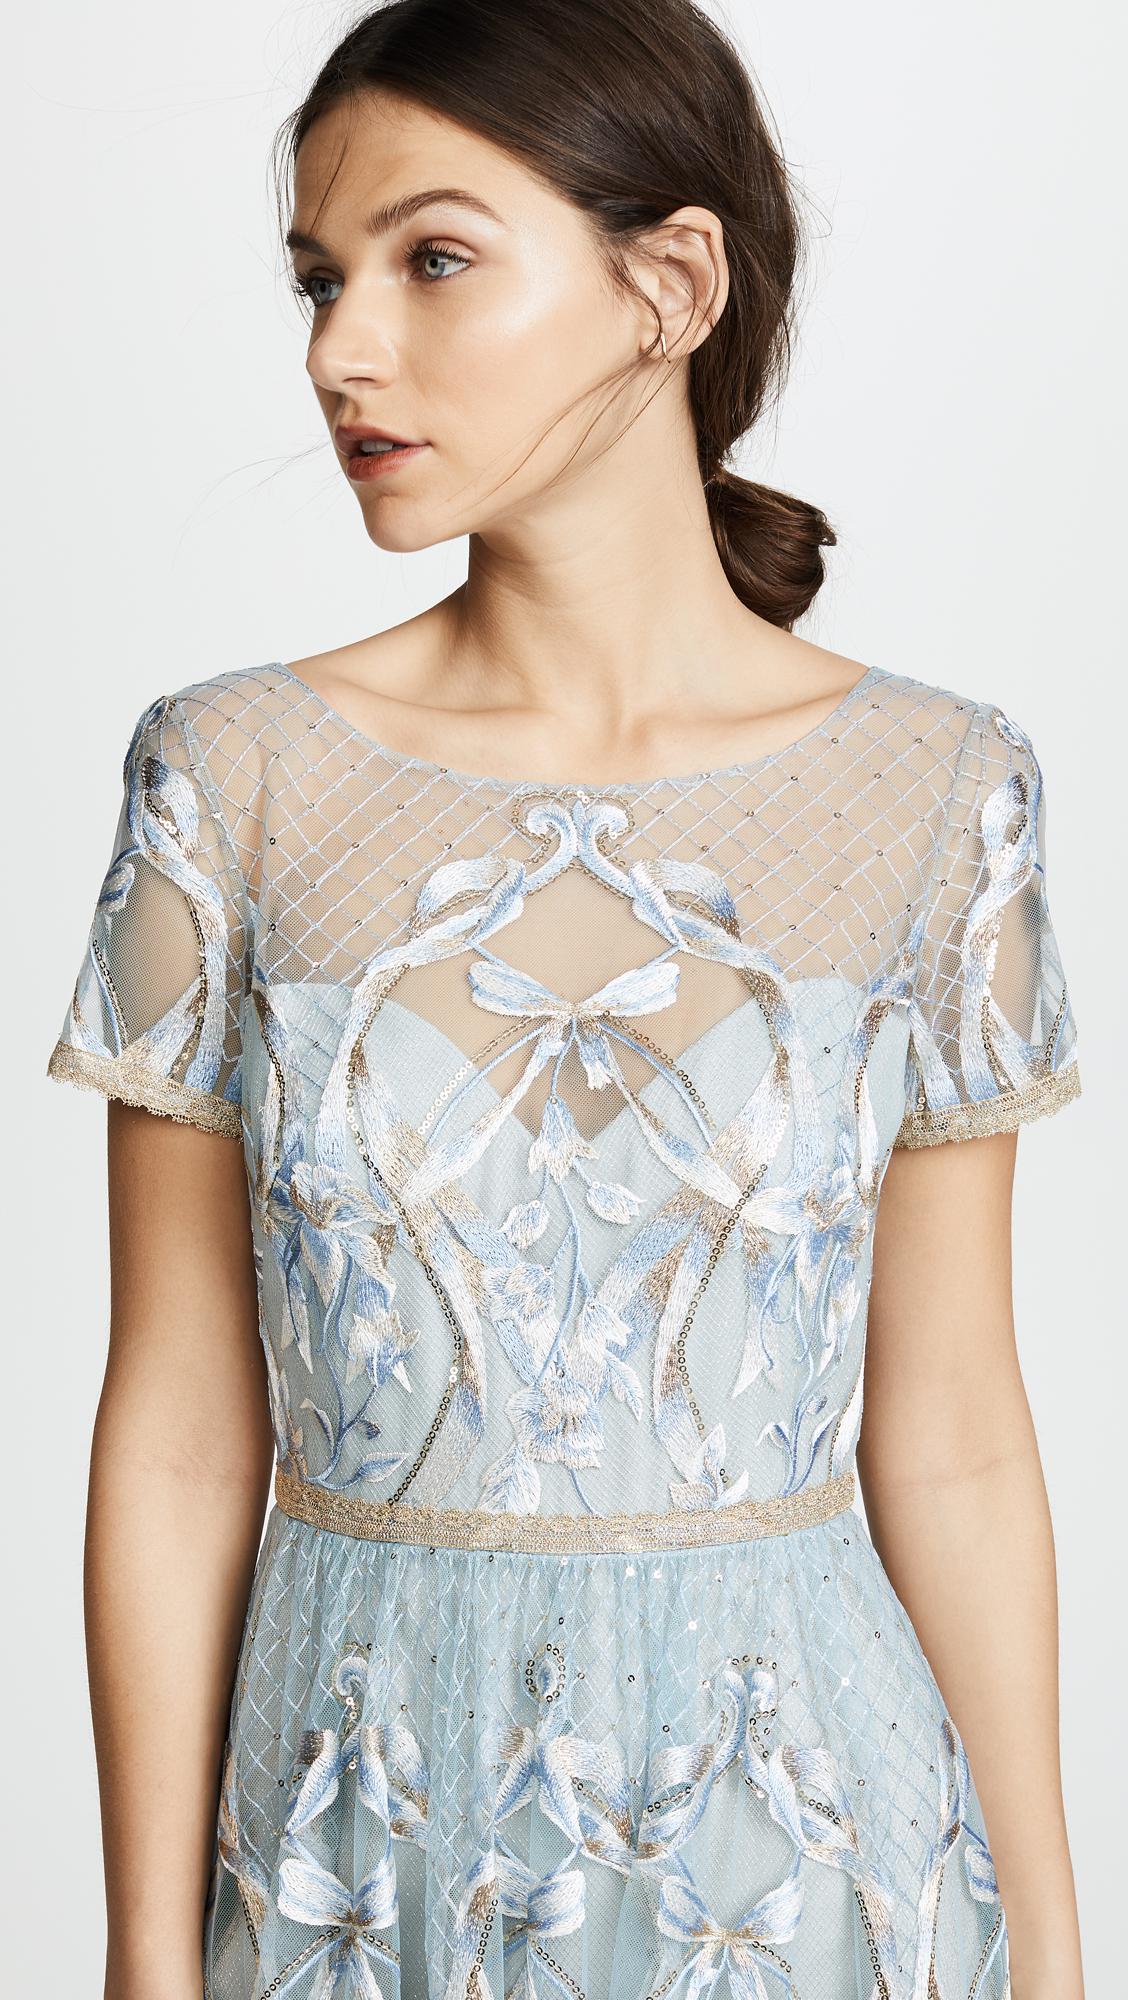 Marchesa notte Embroidered Gown With Metallic Lace Trim in Blue | Lyst